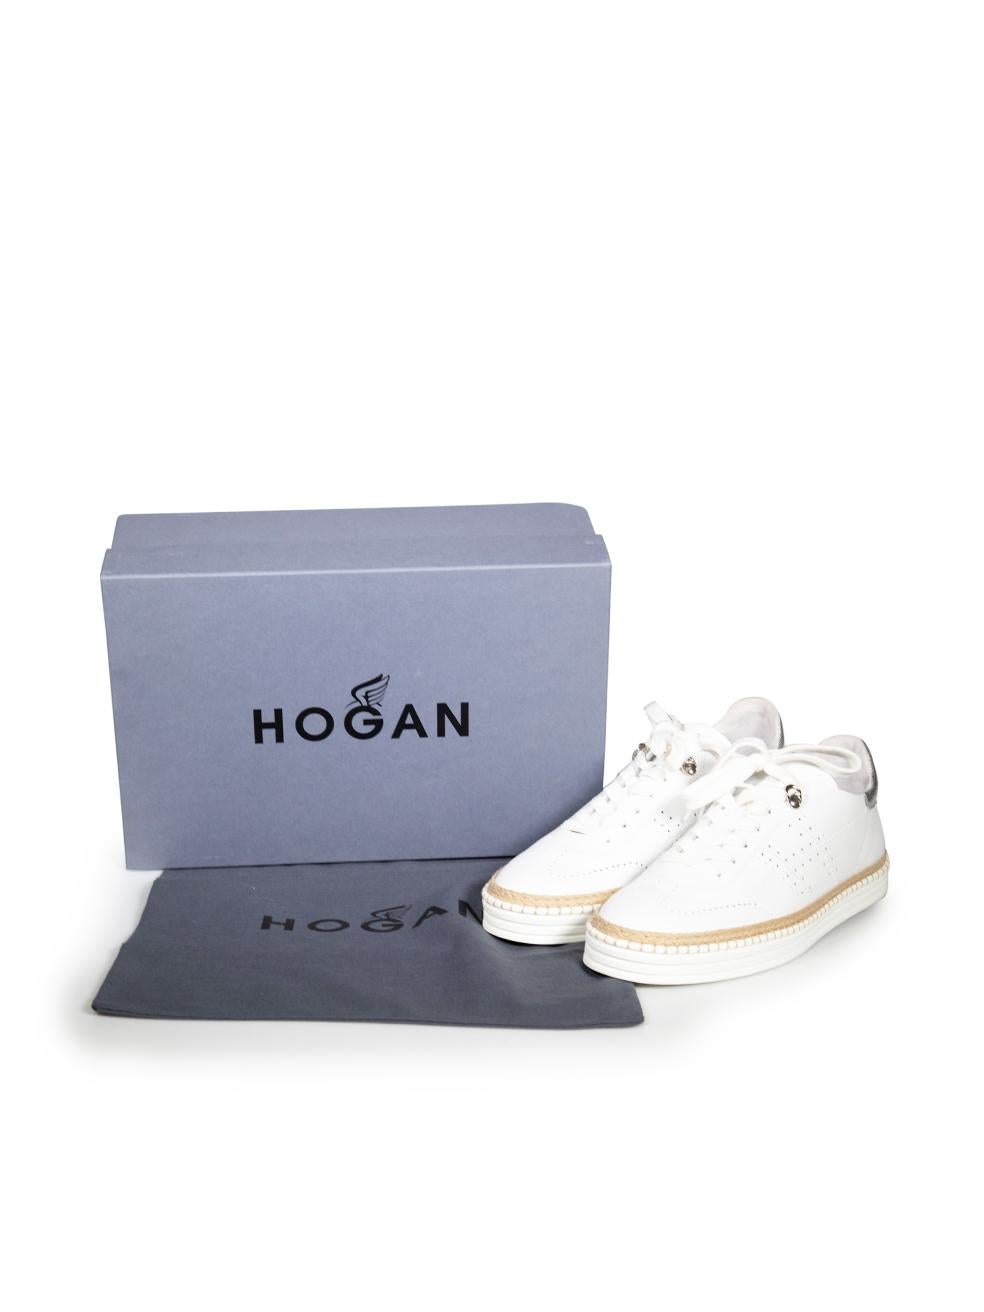 Hogan White Leather R260 Stitched Sole Perforated Trainers Size EU 40 For Sale 4